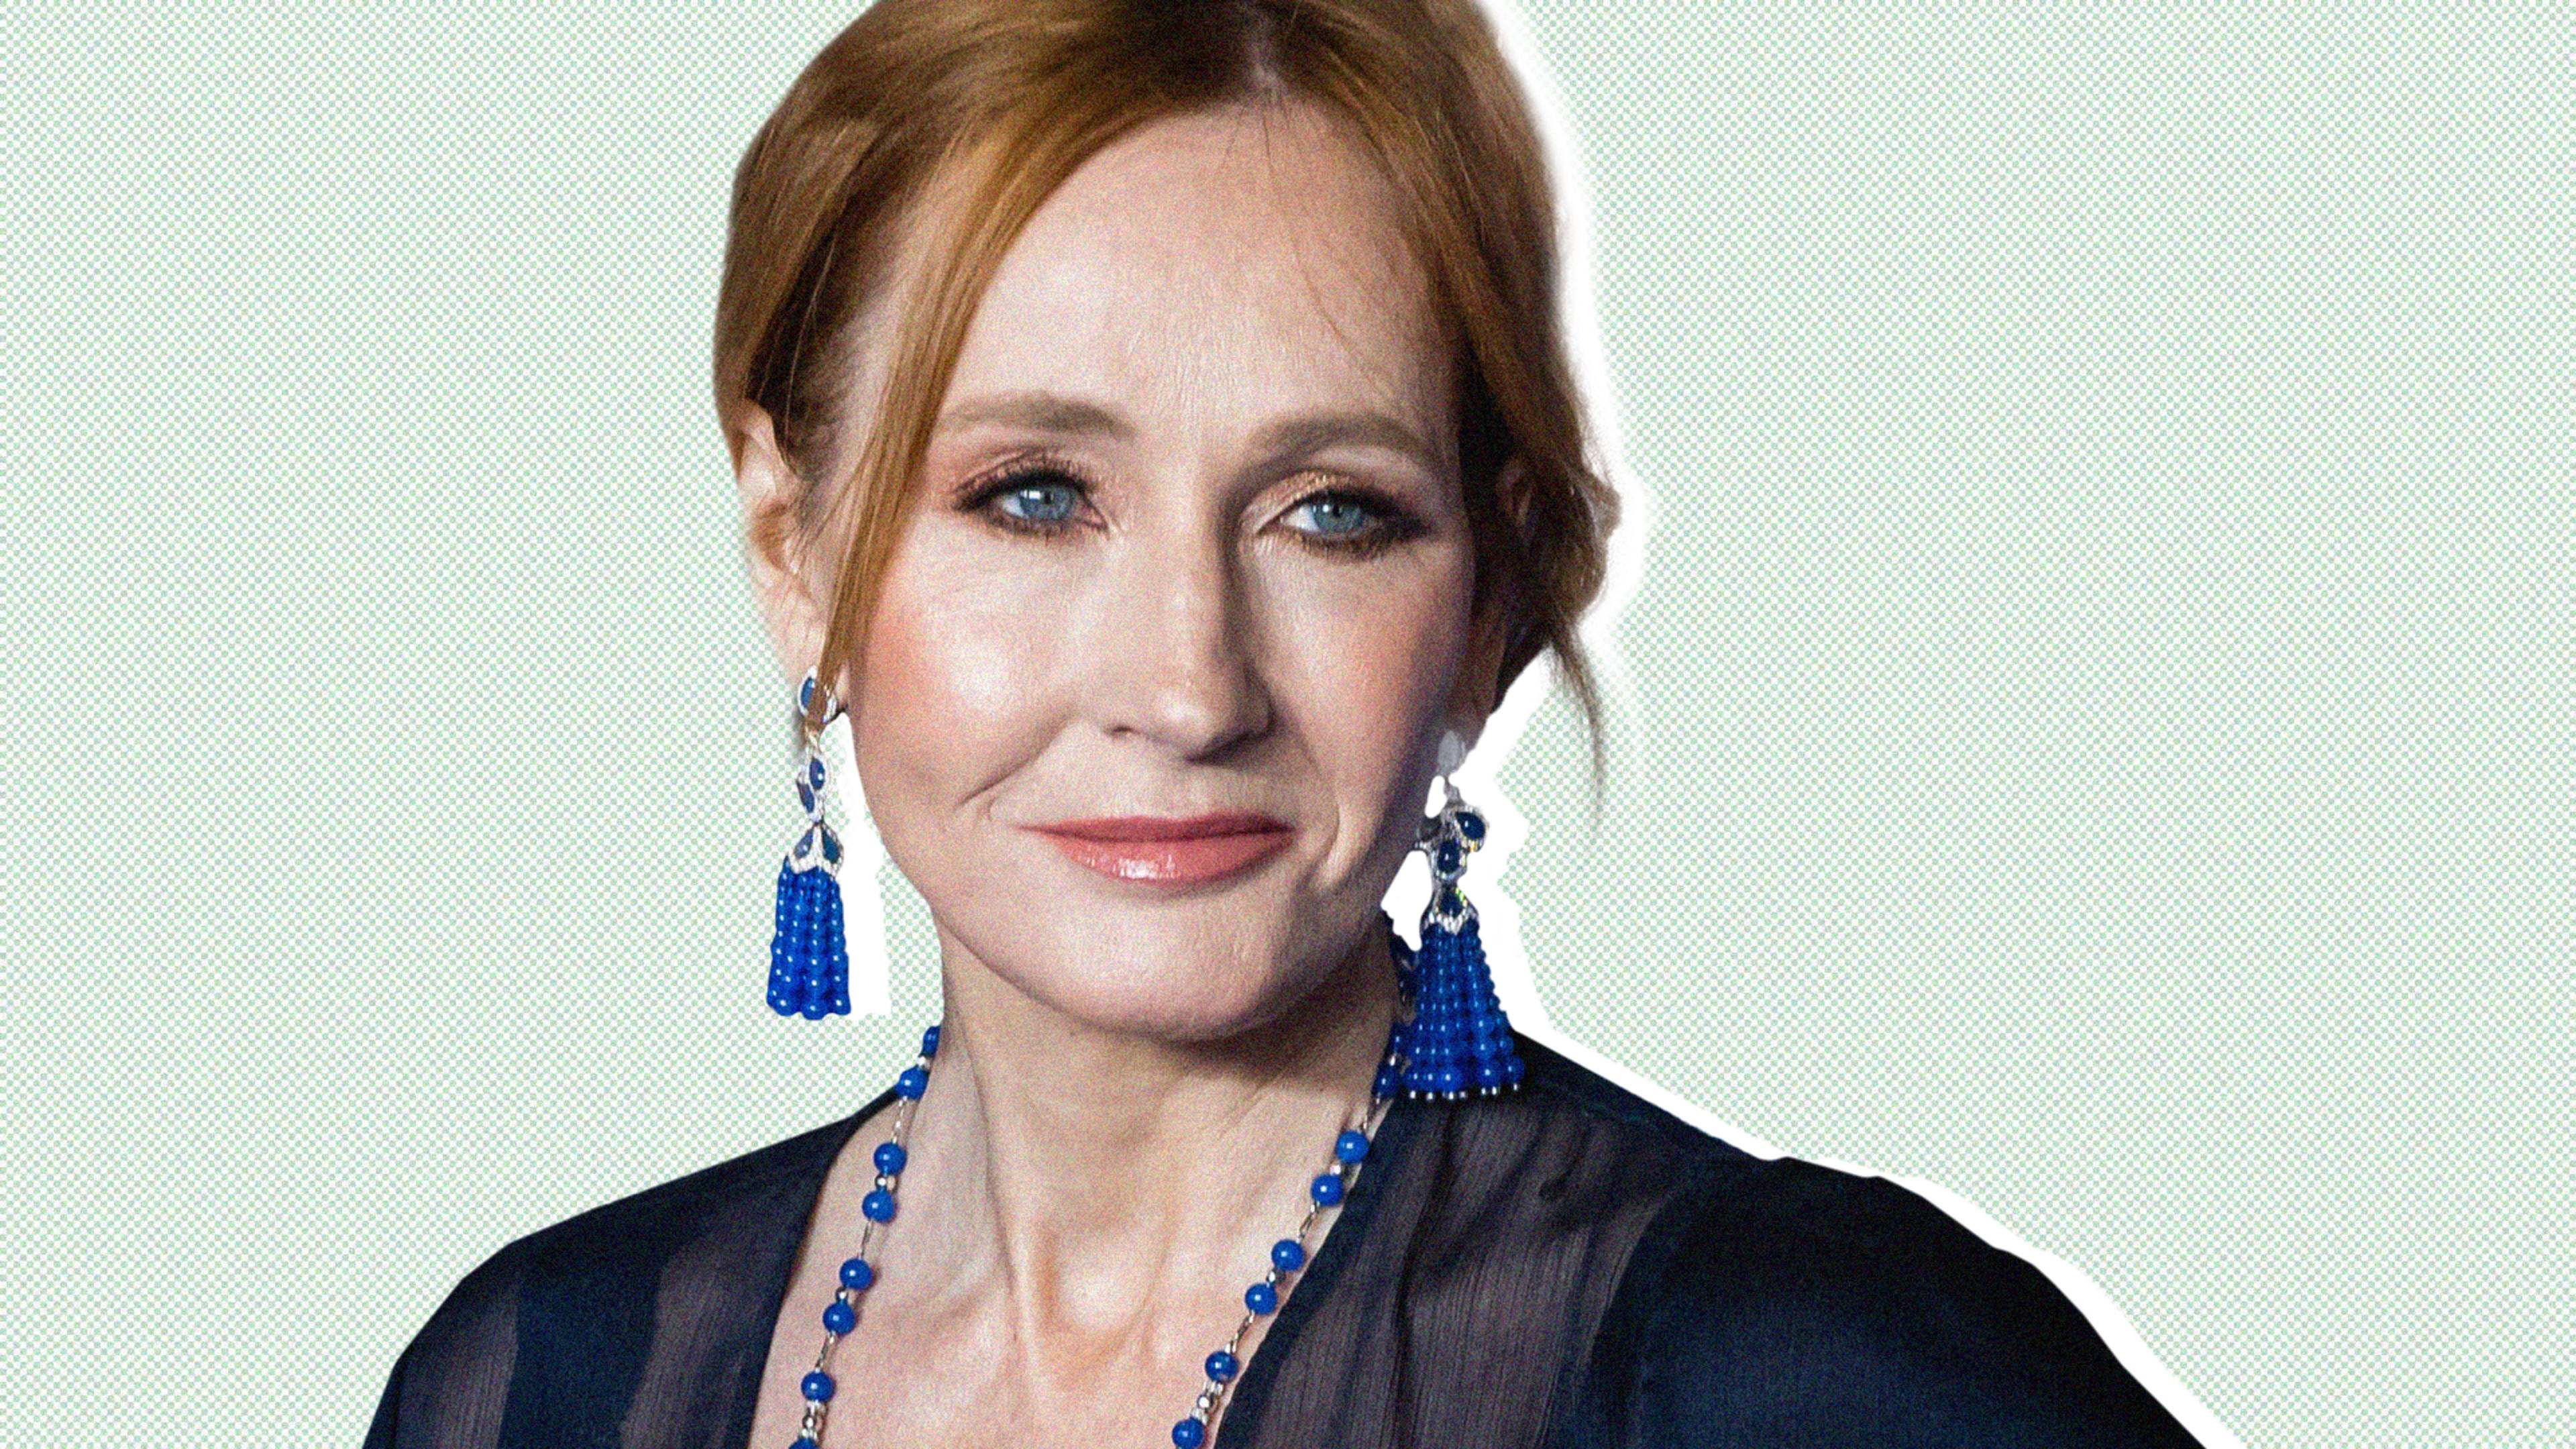 Is J.K. Rowling transphobic? Who is Maya Forstater? Your questions about the U.K. scandal answered